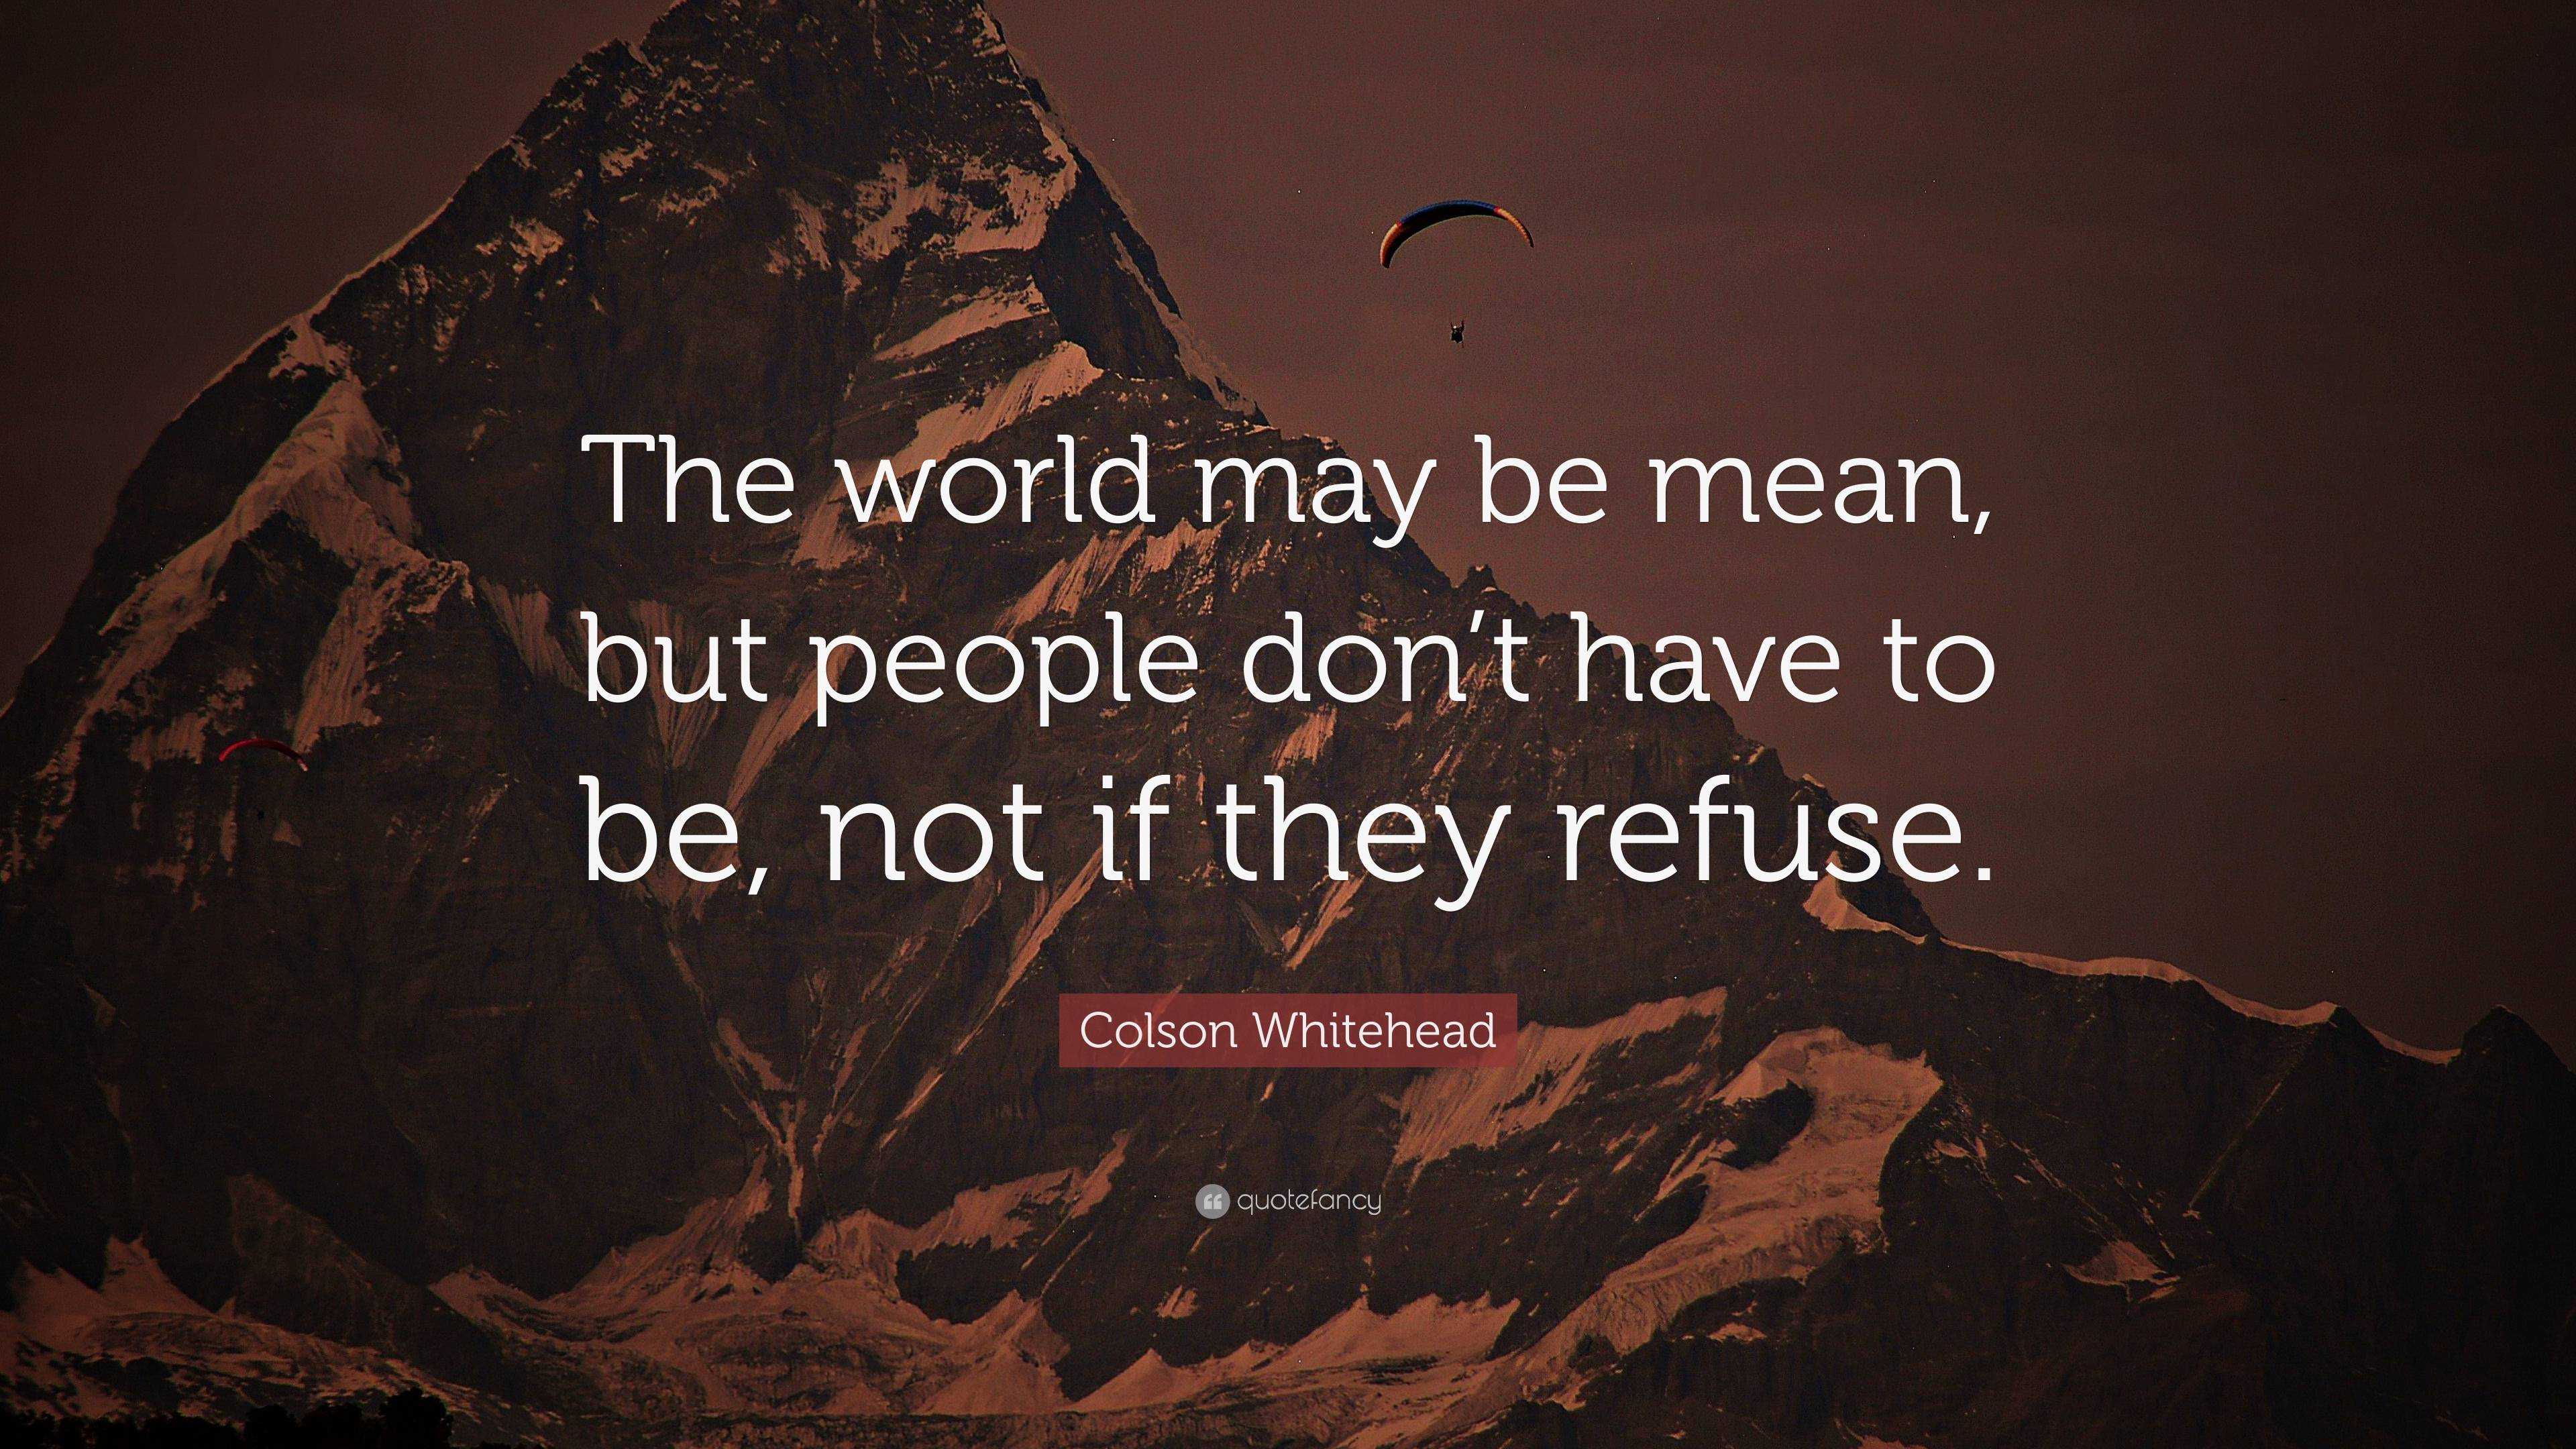 Colson Whitehead Quote: “The world may be mean, but people don’t have